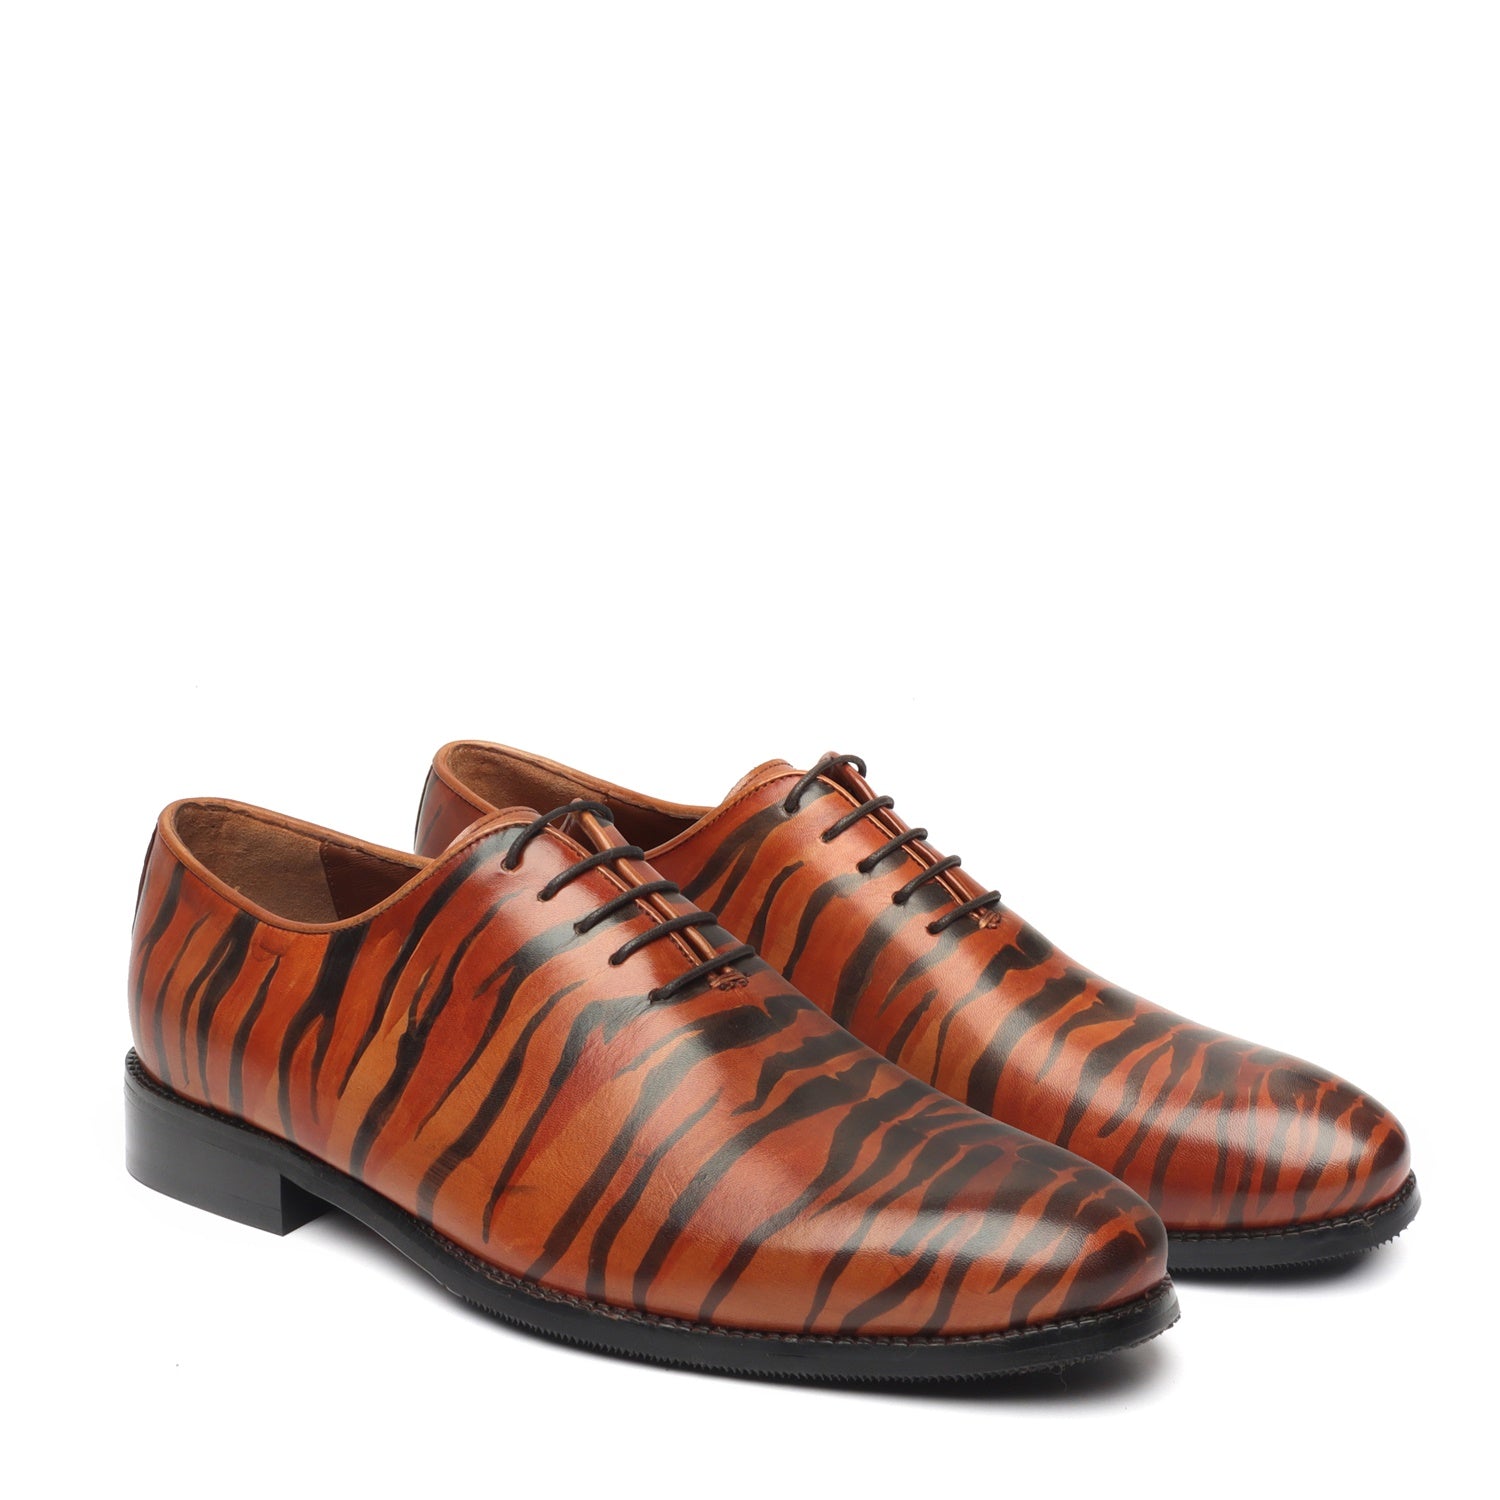 Hand Painted Tribal Tiger Styled Single Piece Tan Leather Oxfords Shoes by Brune & Bareskin